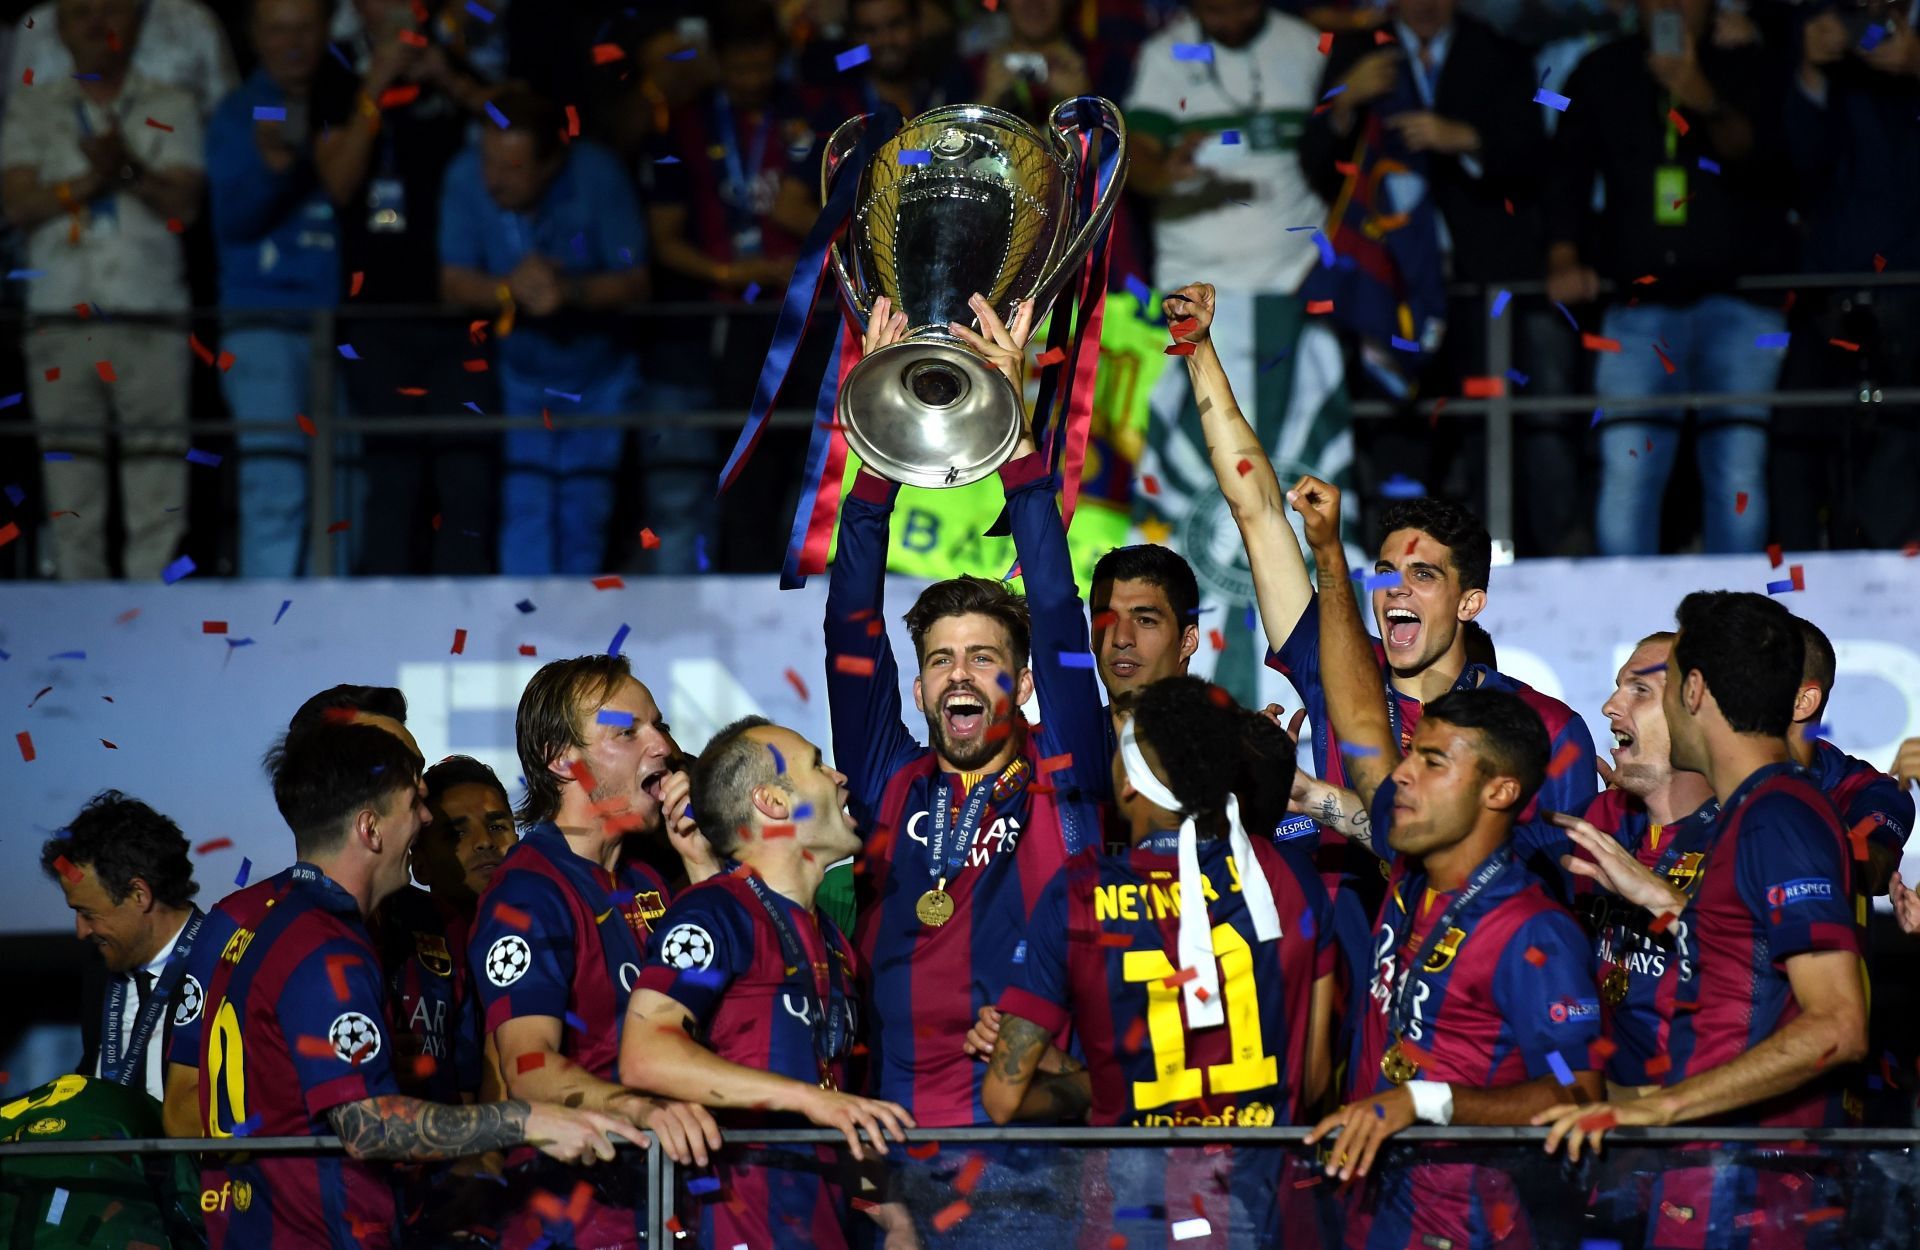 The 2010s saw the dominance of Spanish teams such as Barcelona in the Champions League.